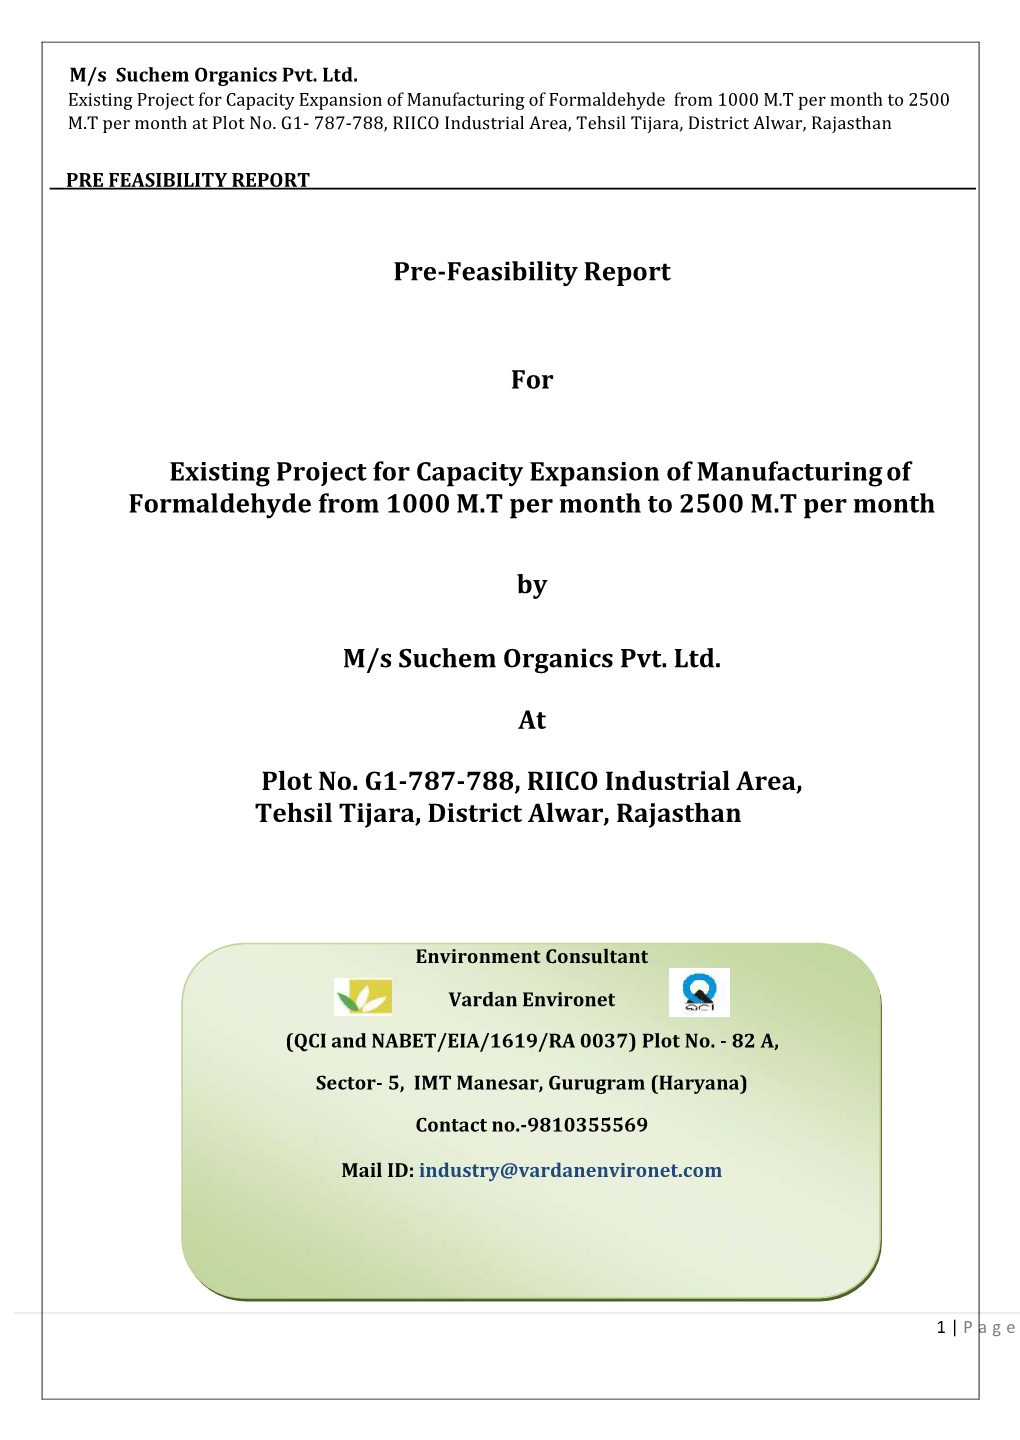 Pre-Feasibility Report for Existing Project for Capacity Expansion Of